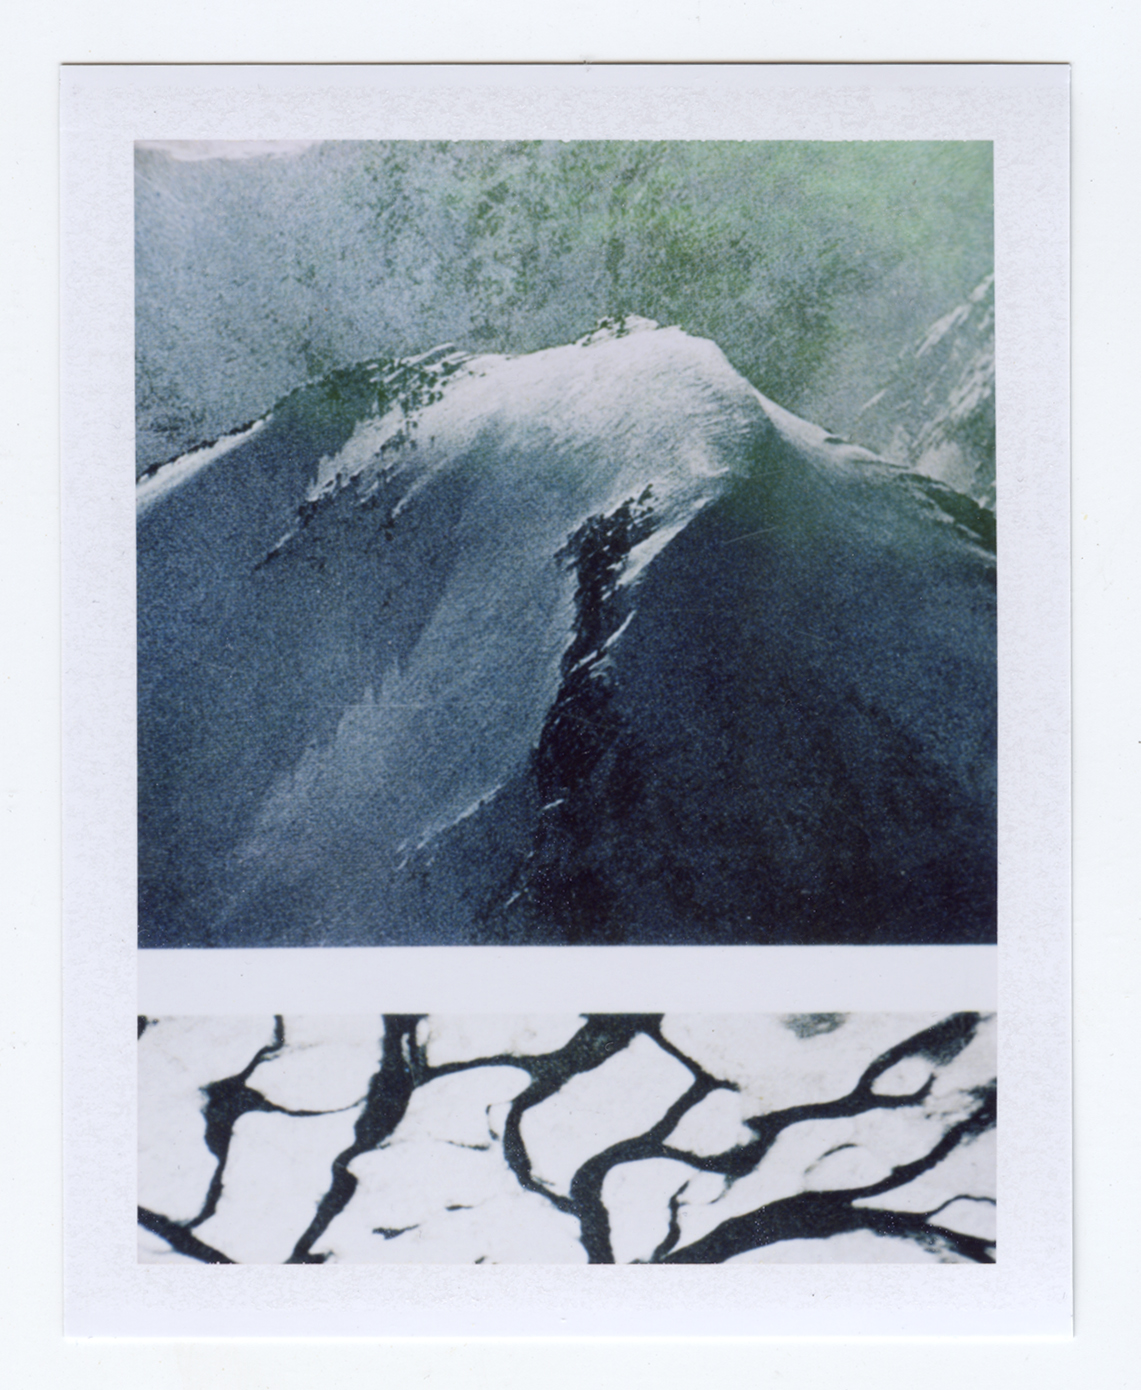   encountering our own fragility  Polaroid of found National Geographic, 2015   Statement + Info  